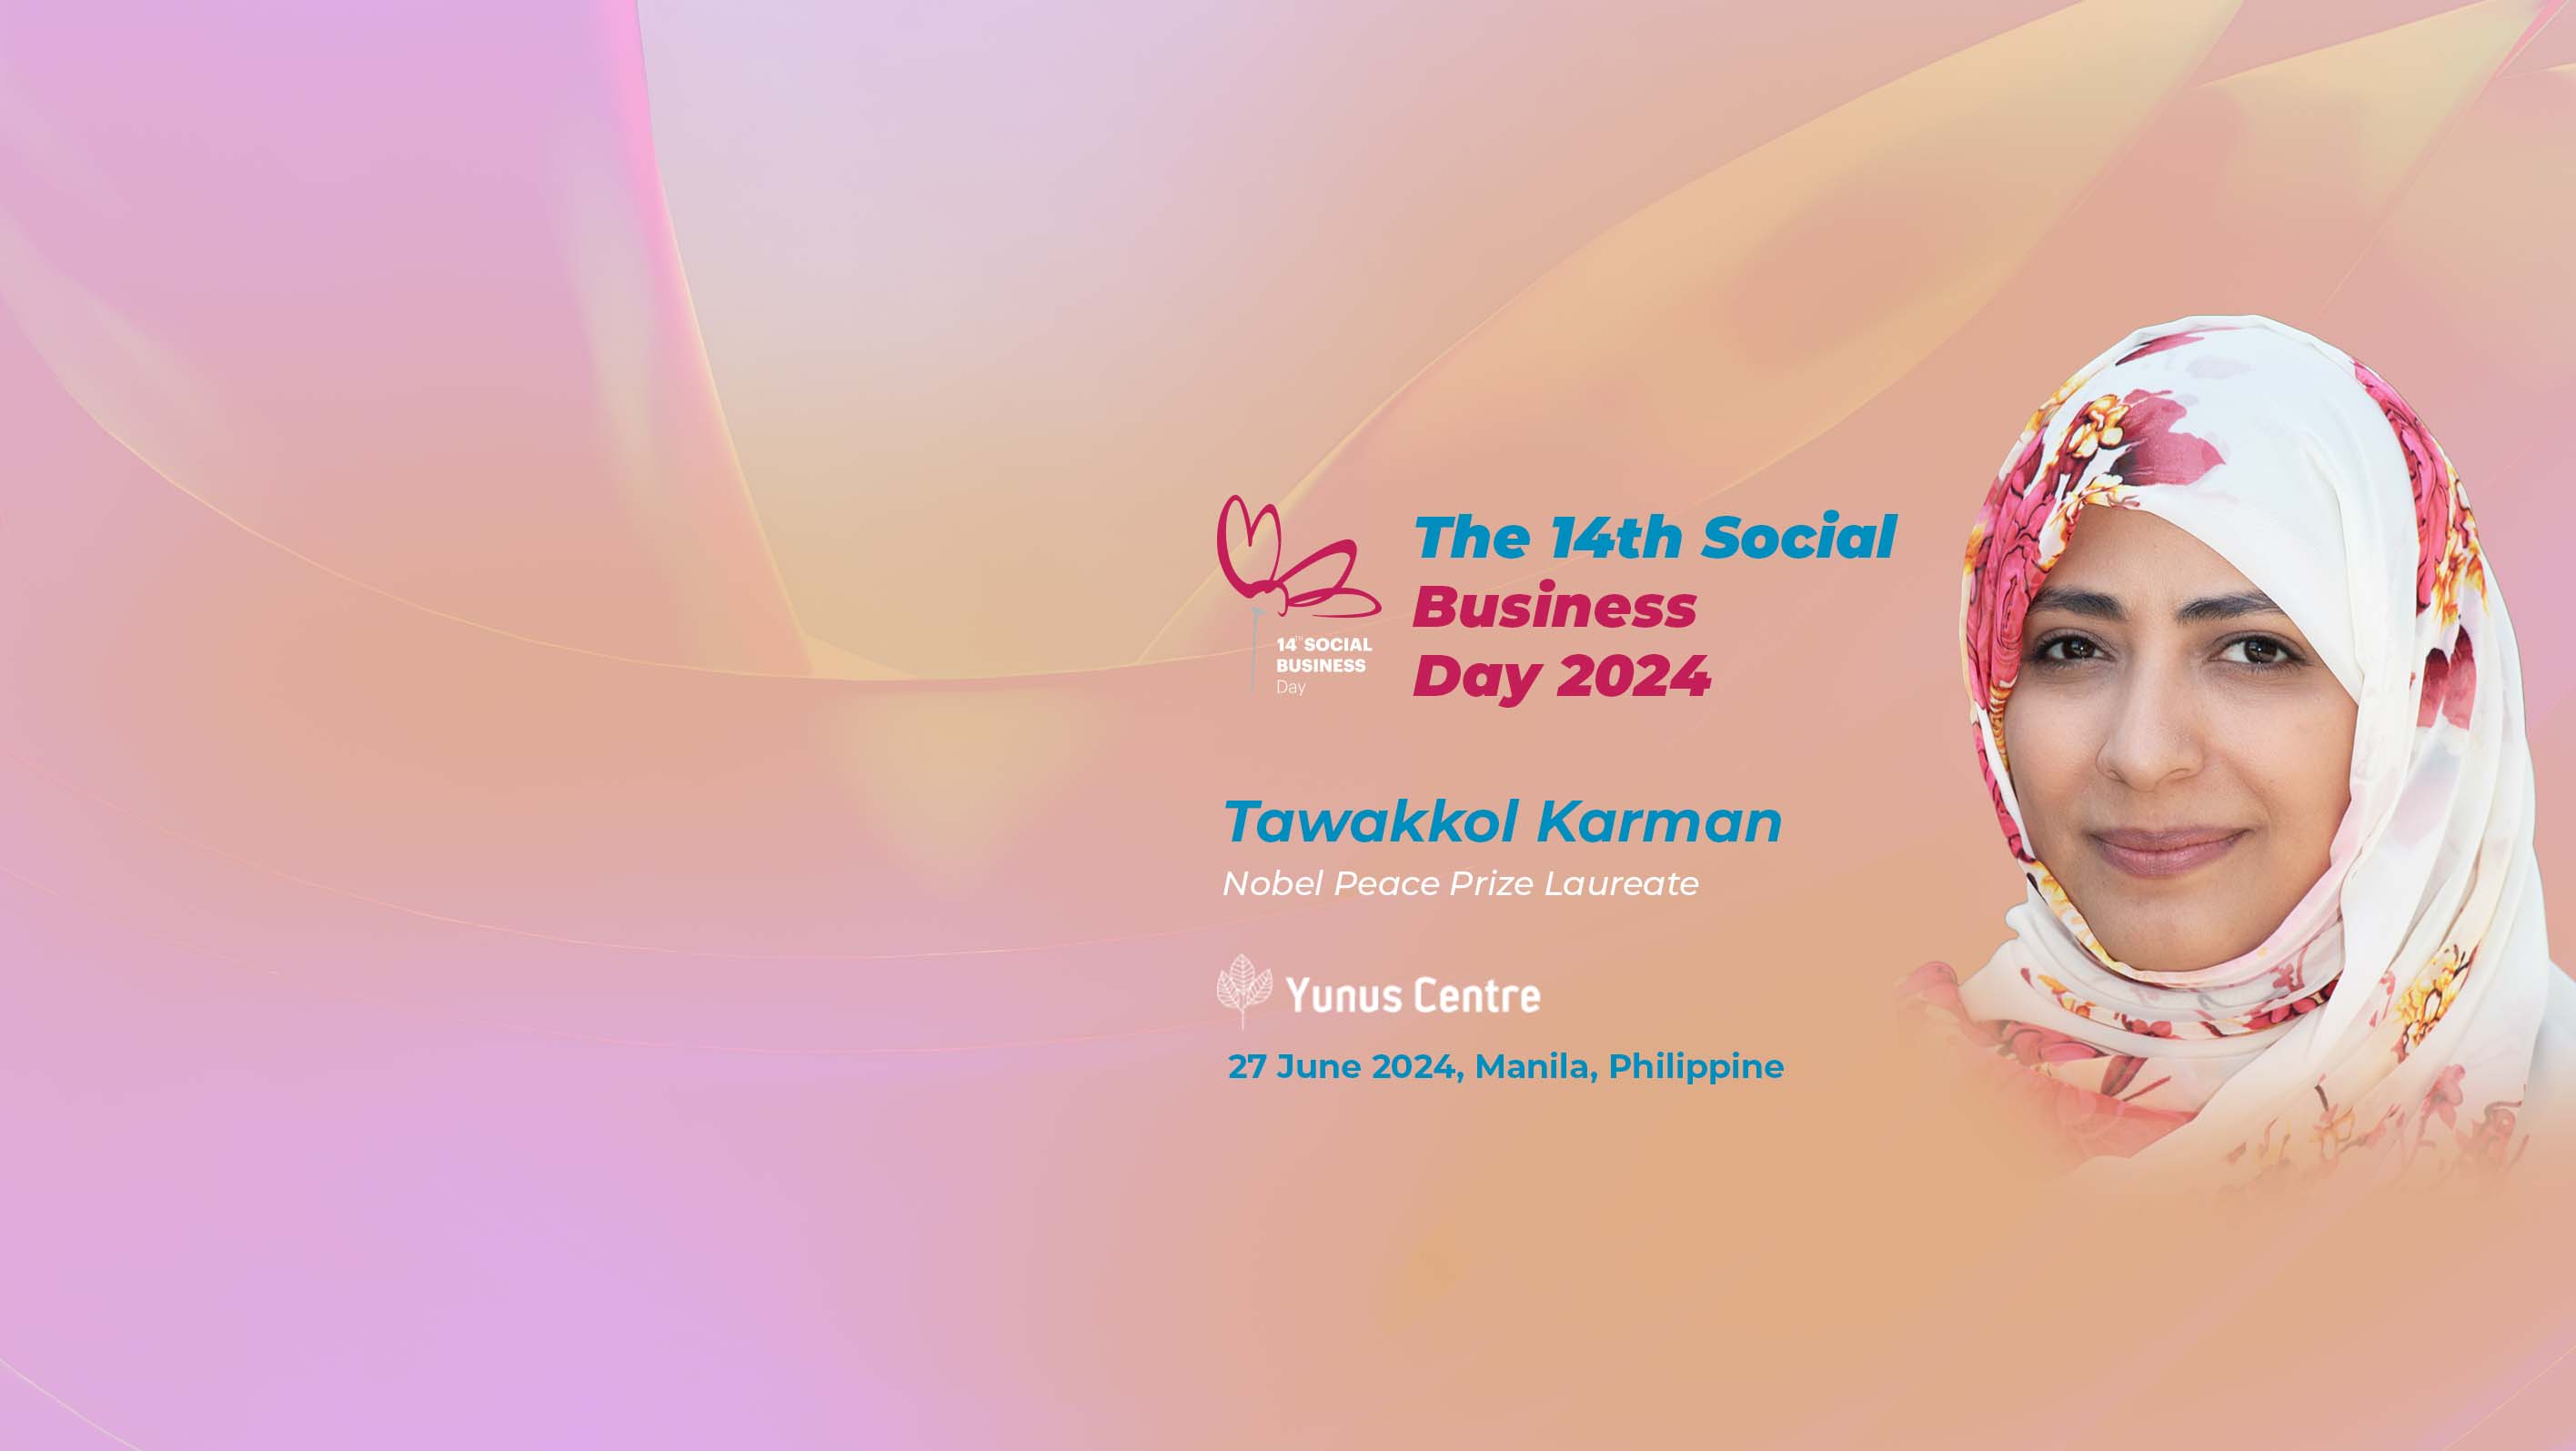 Tawakkol Karman to participate in 14th Social Business Day 2024 Conference in Philippines